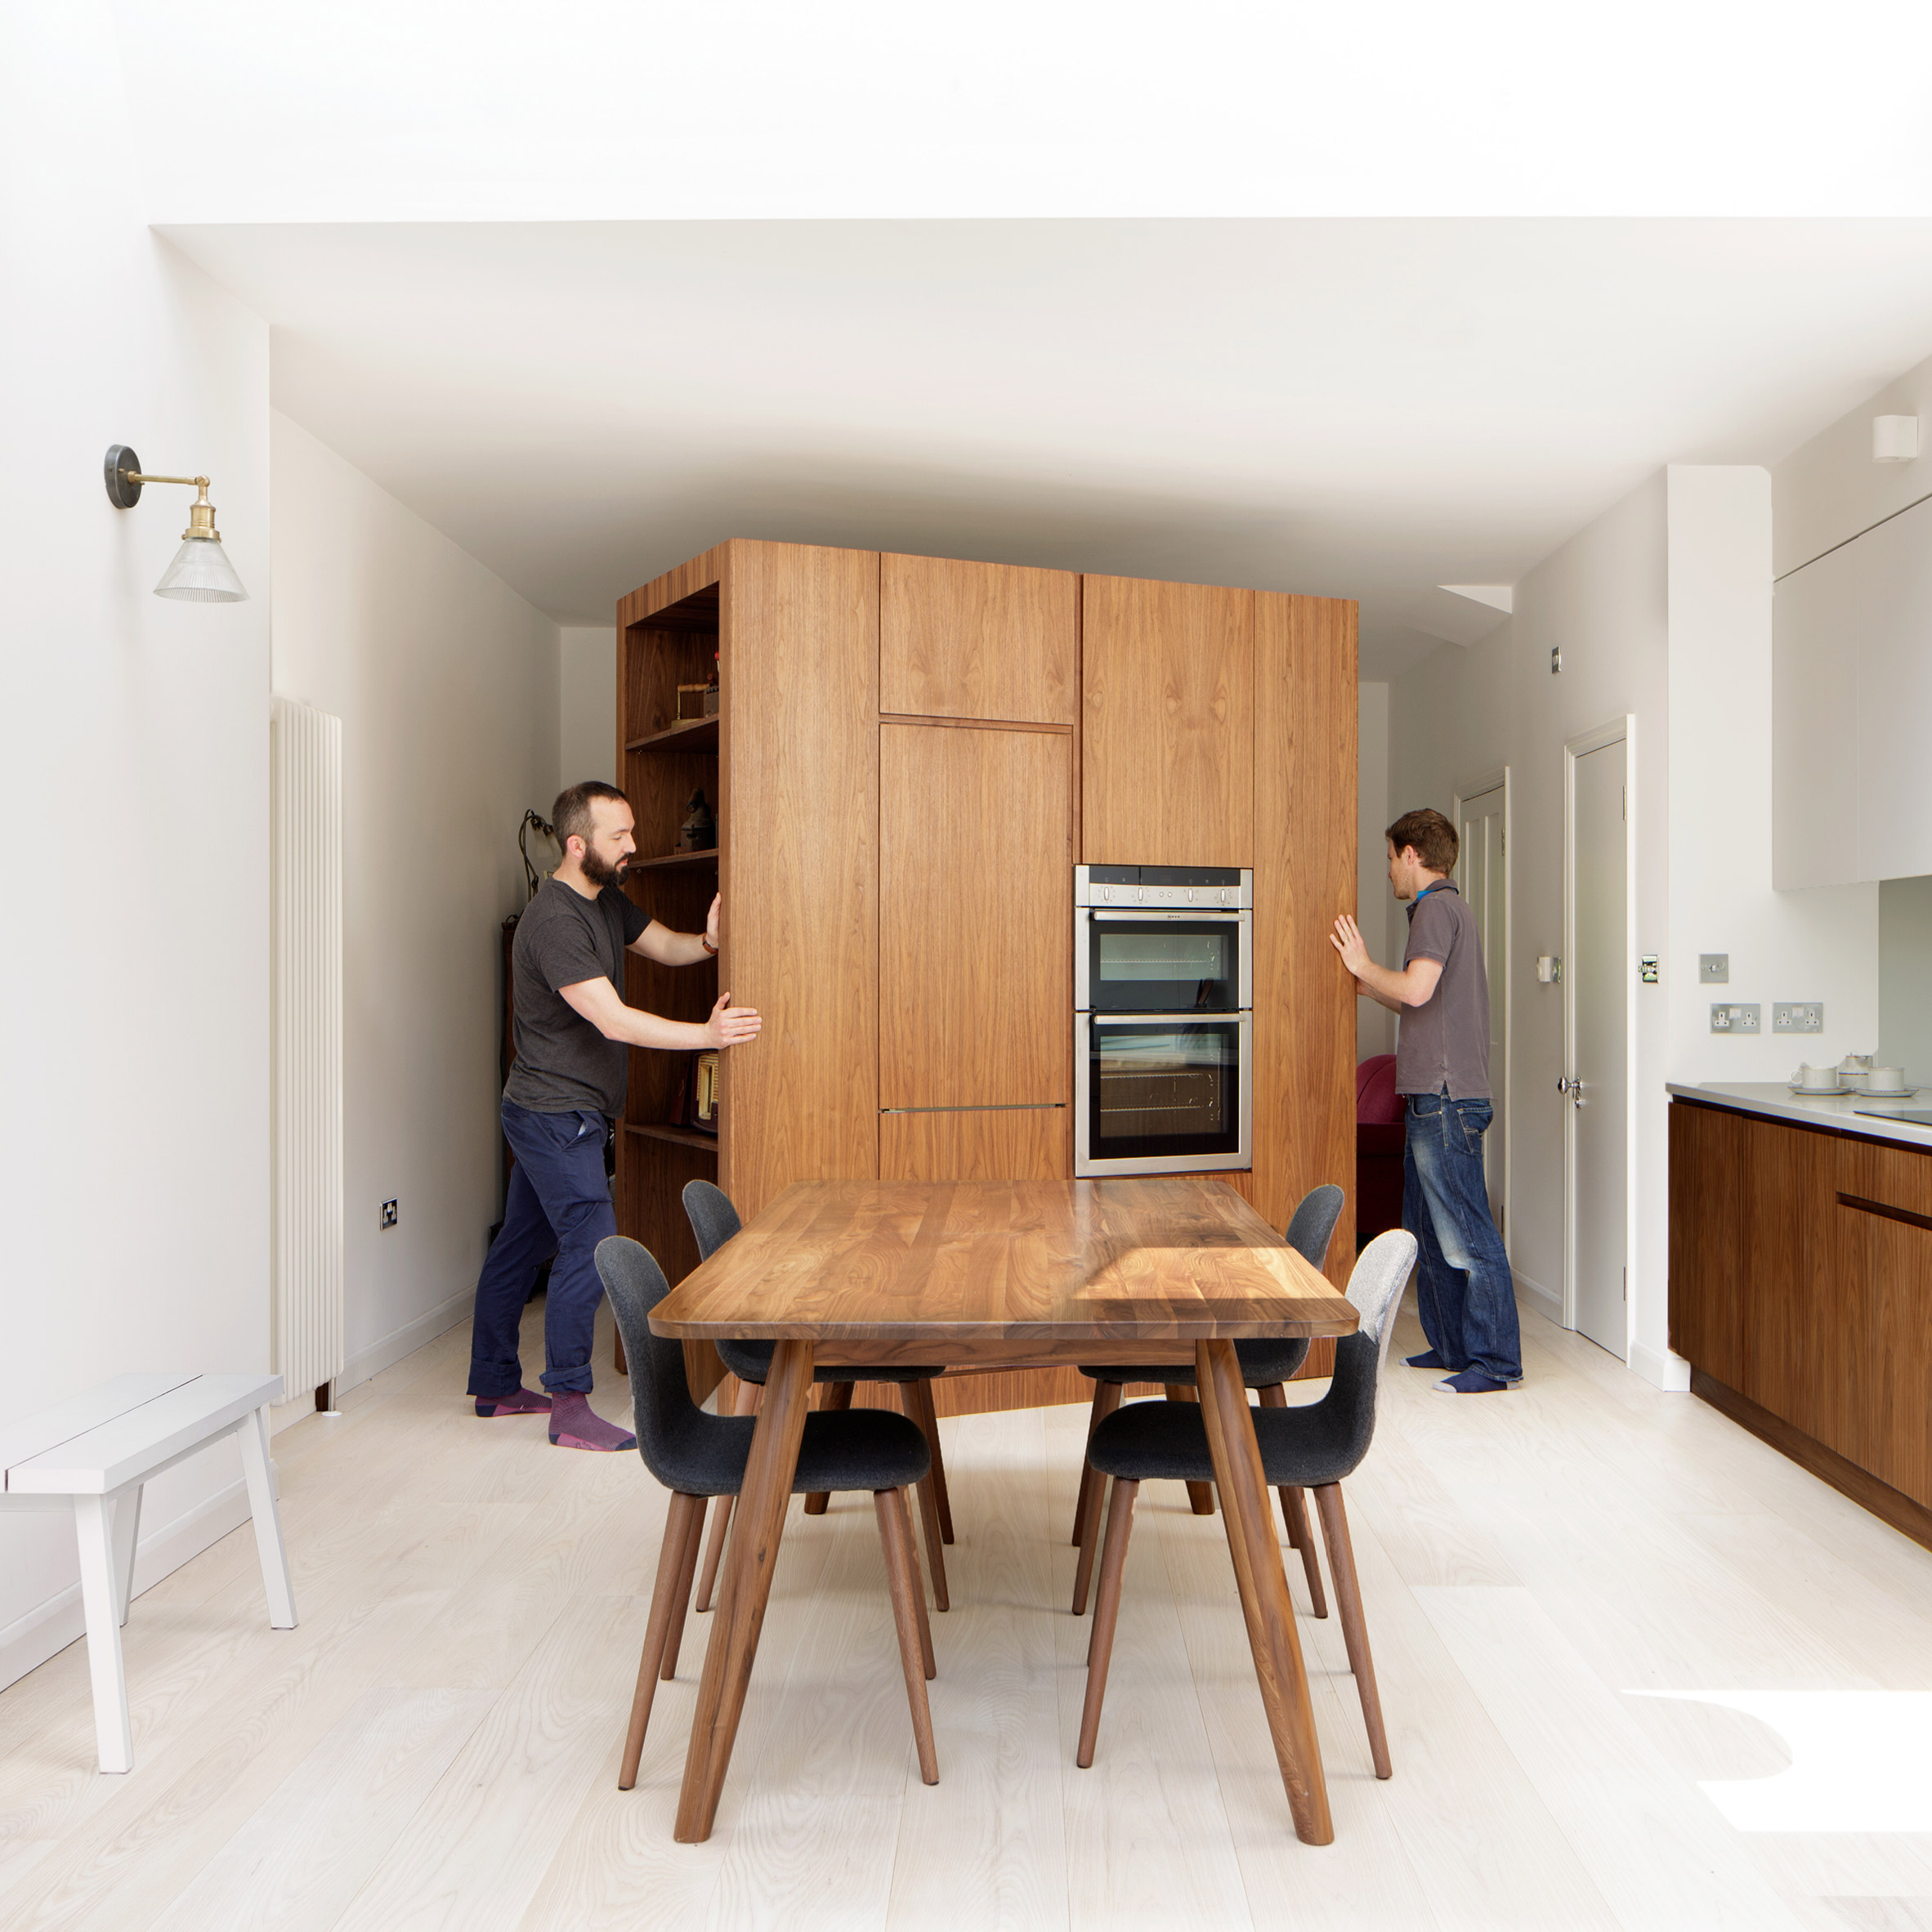 n22-kitchen-on-wheels-turner-architects-dont-move-improve-residential-architecture-extensions_dezeen_sq